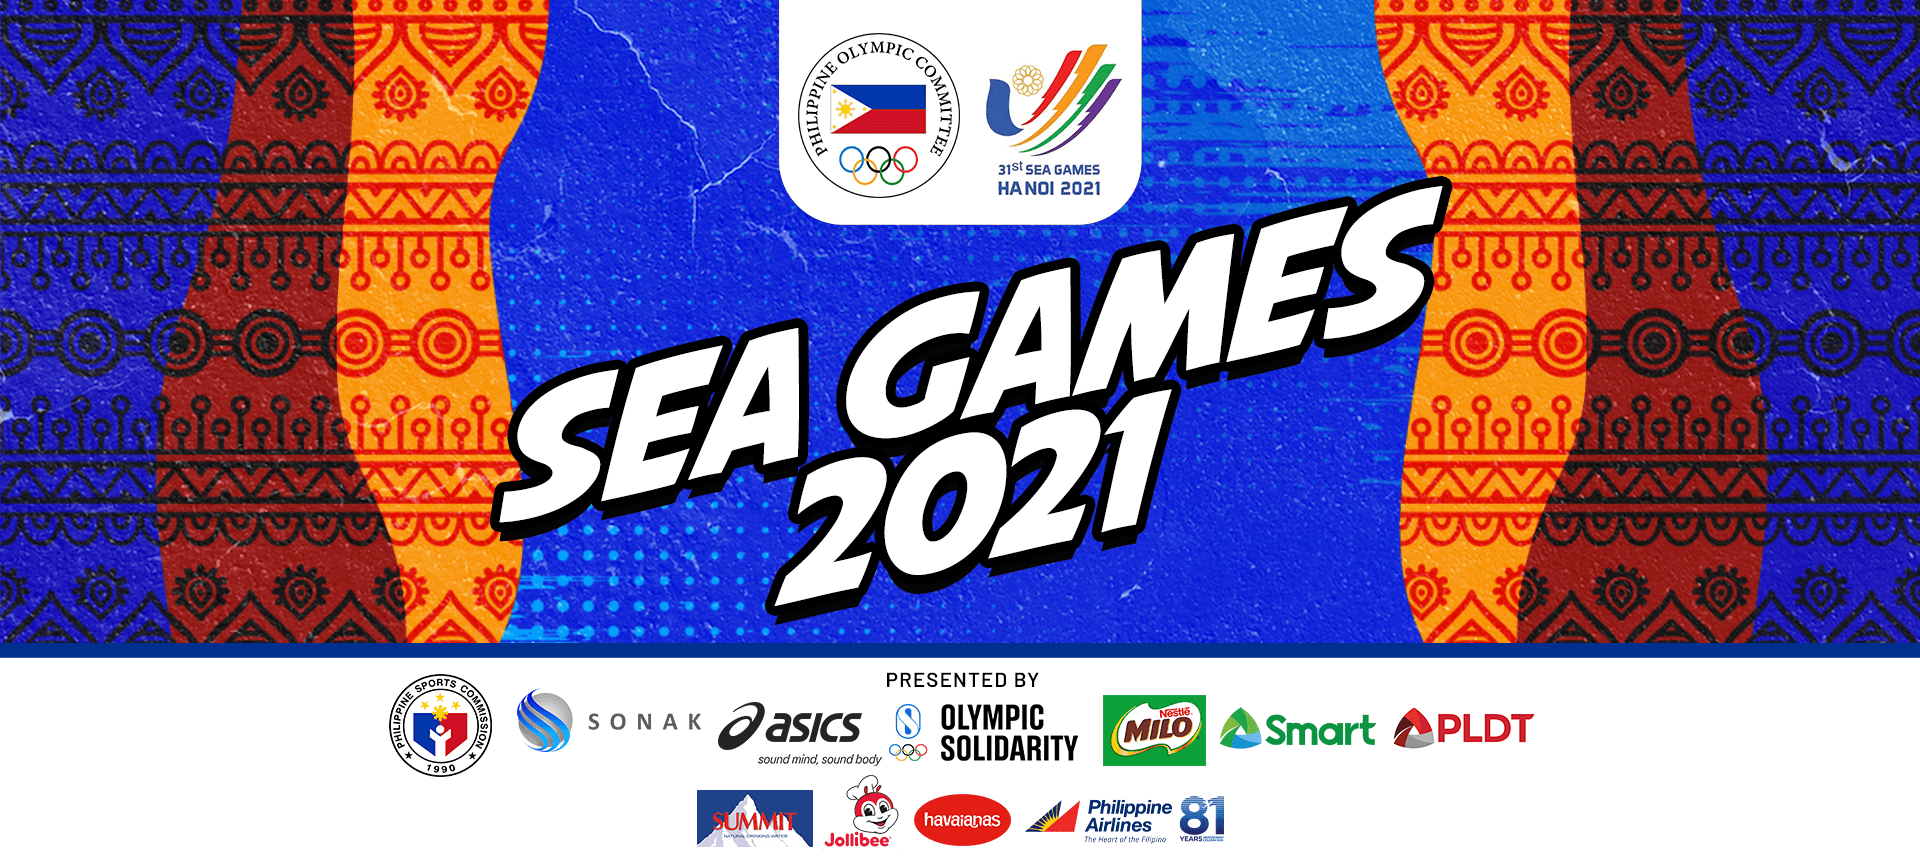 Team Pilipinas all set for SEA Games 2021